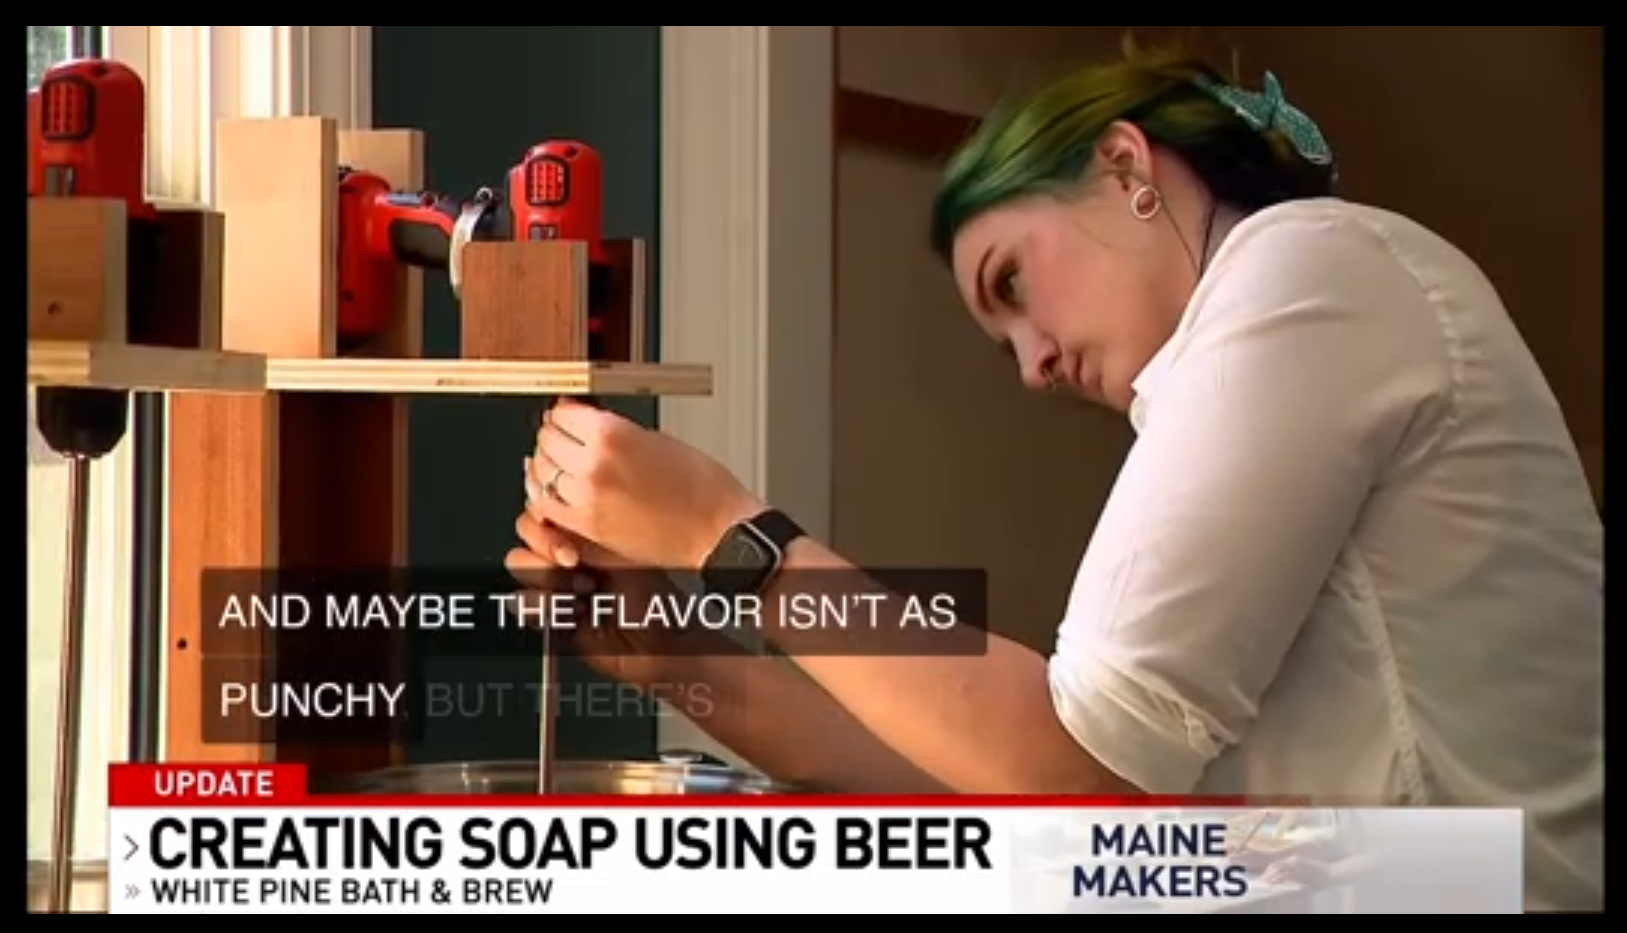 Load video: A Maine maker, who creates soap with beer, is expanding her business. It&#39;s been a year and a half since CBS13 last spoke with Elaine Kinney, the brains behind White Pine Bath &amp; Brew. &quot;I&#39;ve been expanding a lot physically, growing out of my space a bit. I’ve also been working with more breweries,” Kinney said. Kinney is keen on getting her beer from production excess and brewery waste, which would otherwise go down the drain. &quot;Things like short fills or beer that&#39;s been overstocked and is getting a little old and maybe the flavor isn&#39;t as punchy but there isn&#39;t technically anything wrong with it, but they&#39;re not allowed to sell it,” Kinney said.Her products still reap the benefits once she boils out the carbonation and alcohol.“The hops contain amino acids which is really soothing for skin irritation, there&#39;s also biotin, pantothenic acids and just tons of other essential vitamins in brewers’ yeast,” Kinney said.Customers get those extra vitamins compared to normal bars of soap which typically use water.“And I’ve also noticed that beer tends to enhance the lather and make it a little more luxurious and frothy,” Kinney said.Kinney has recently heard more from gluten sensitive customers asking if her products are safe and she also recently went gluten-free.“And I’ve never had any issues with any of my beer soap, gluten or otherwise, but I definitely get that hesitation, that fear that you&#39;re going to get hurt. So, I wanted to offer something new in my lineup that I felt represented those people and gave them that extra sense of security,” Kinney said. She&#39;s teaming up with Lucky Pigeon Brewing, a dedicated gluten-free brewery in Biddeford.“It&#39;s very rare to find good gluten free beer so I was really excited to reach out to them, and I wanted to start using their beer in my cocoa butter bar which is a fragrance-free bar,” Kinney said.And now she&#39;s focused on spreading the word.&quot;I have had people at each market say well, ‘I don’t necessarily know I should have this even though I’m not ingesting it.’ And then I’m able to tell them, ‘No, I’m gluten-free too, this has worked for me.’ Granted everyone is so different, but it&#39;s usually really exciting because they&#39;re like, ‘Oh, I want to try this now’” Kinney said.